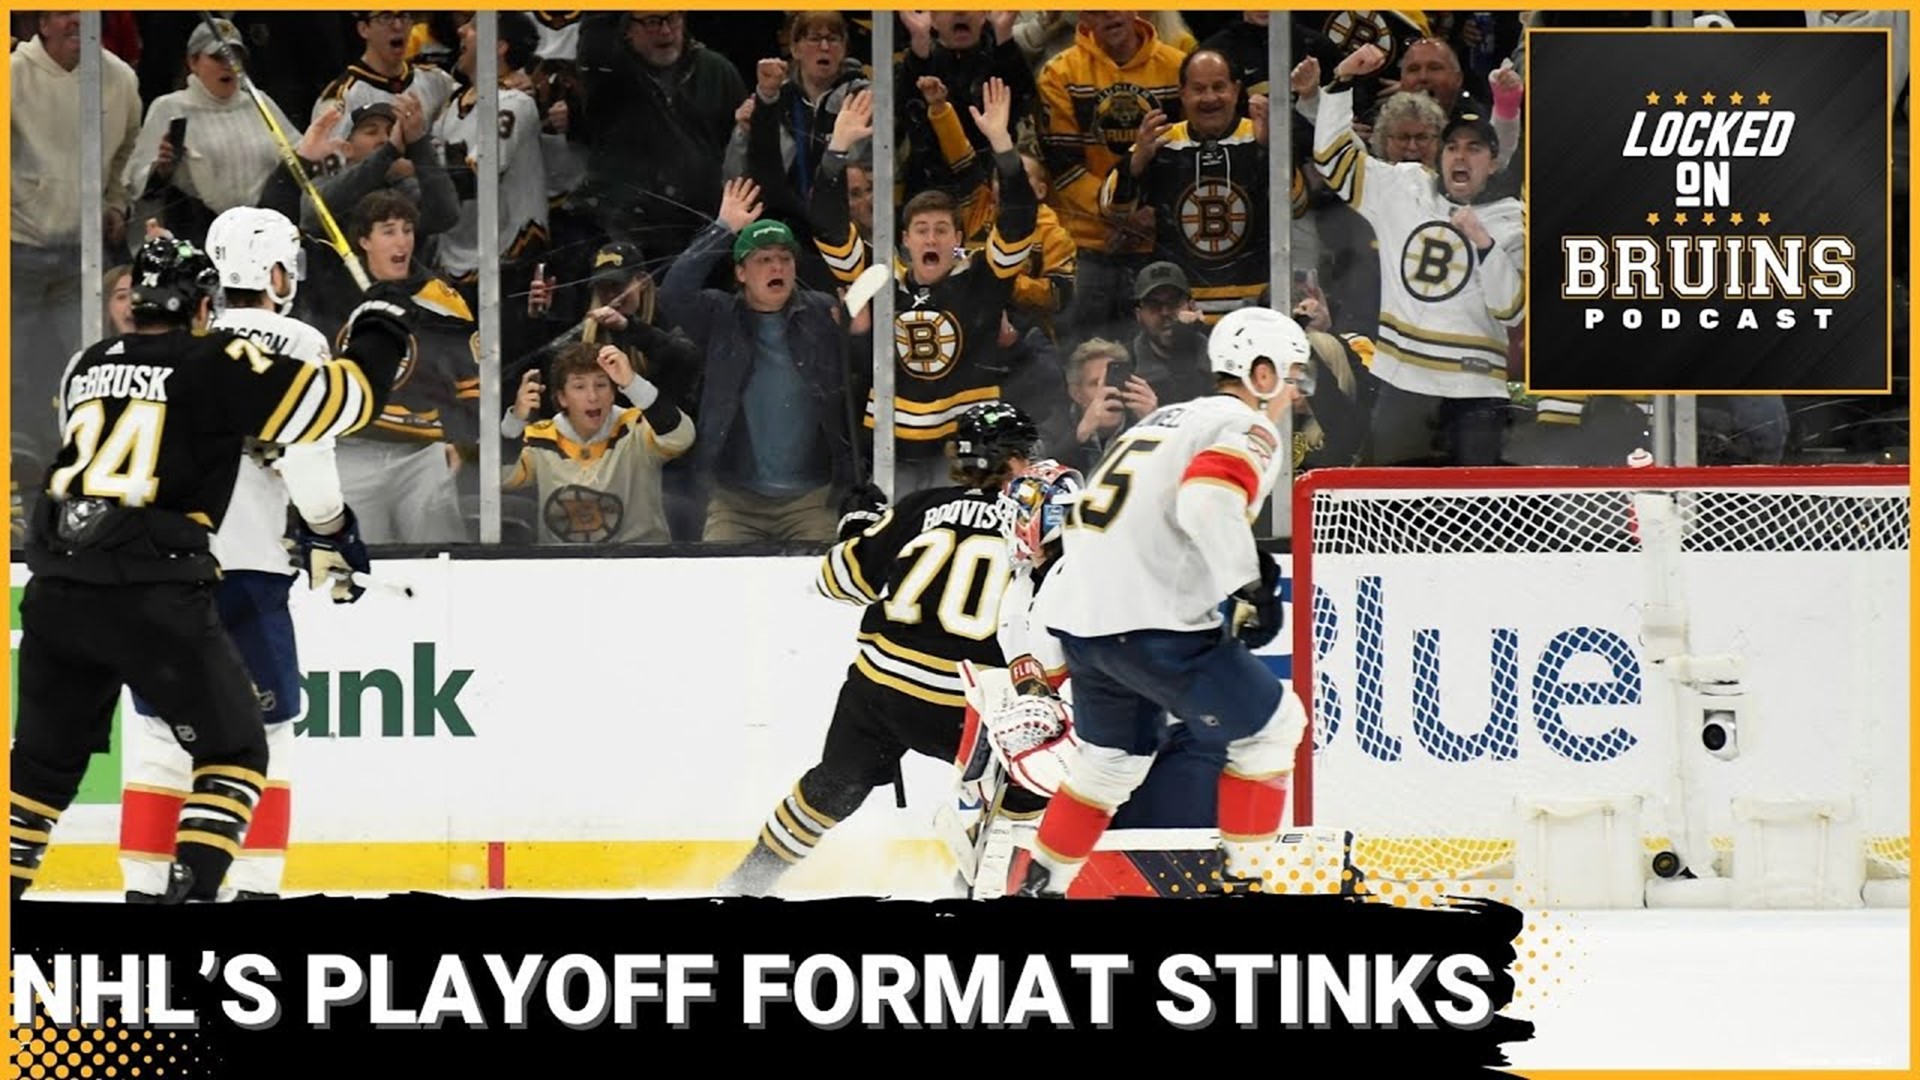 Bruins are about to get hosed by the NHL's